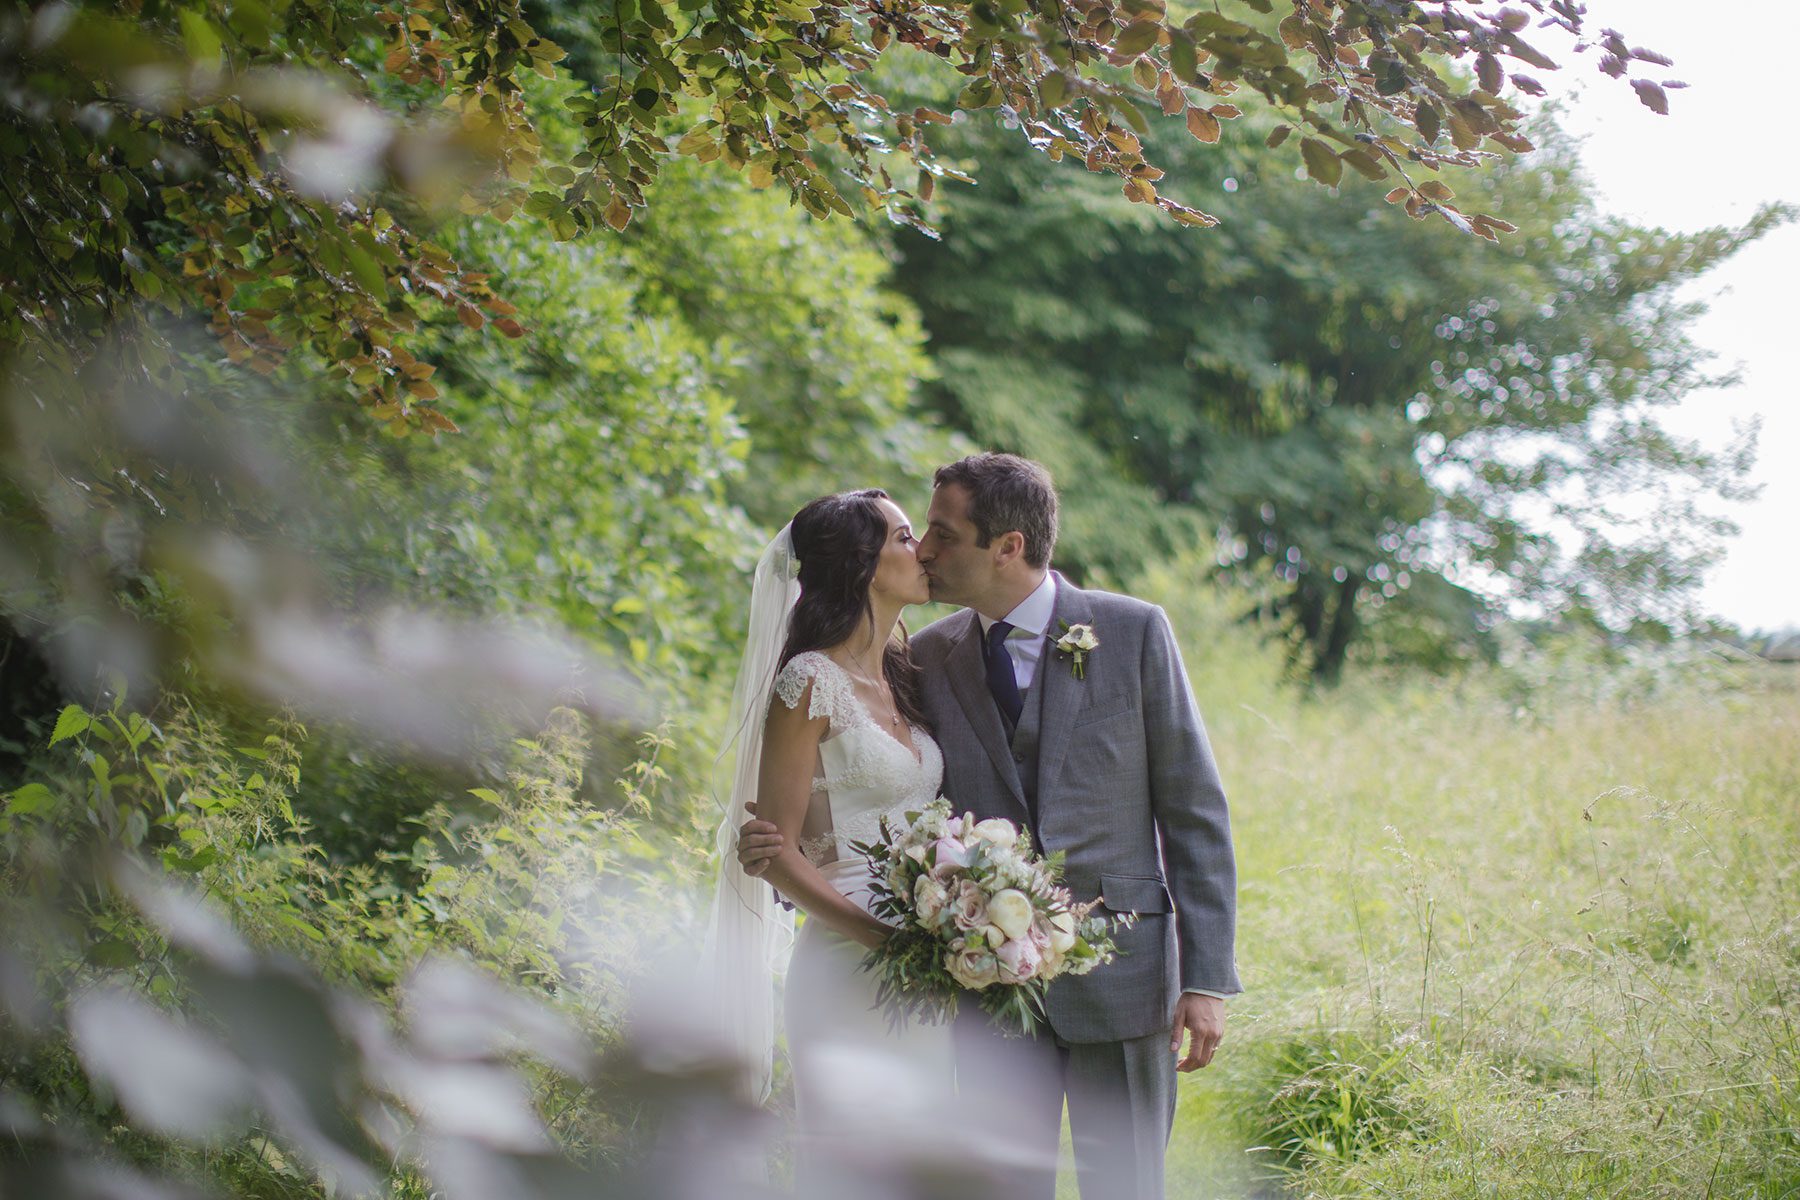 In the fields - Reportage Wedding Photography in Cheltenham | Bullit Photography